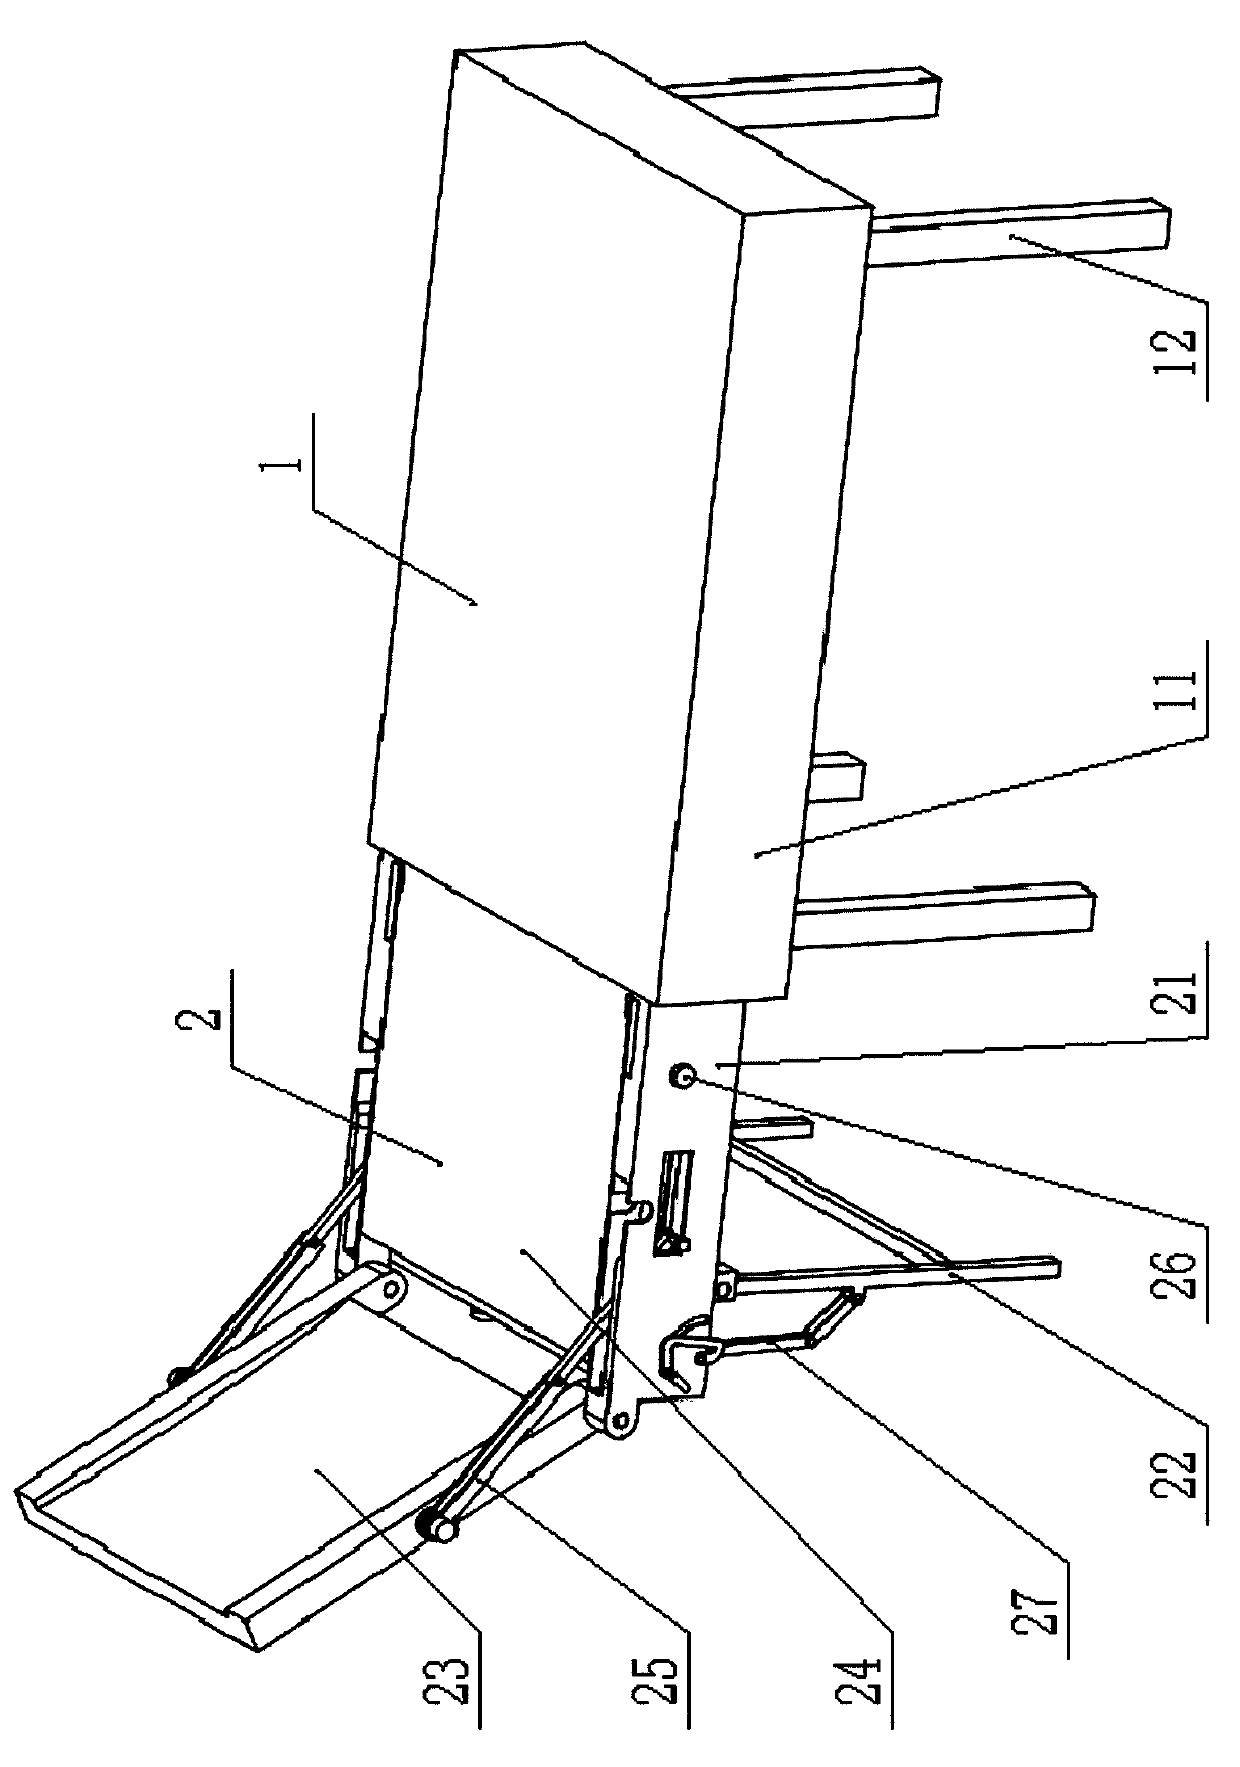 Extensible foldable bed-chair dual-purpose device